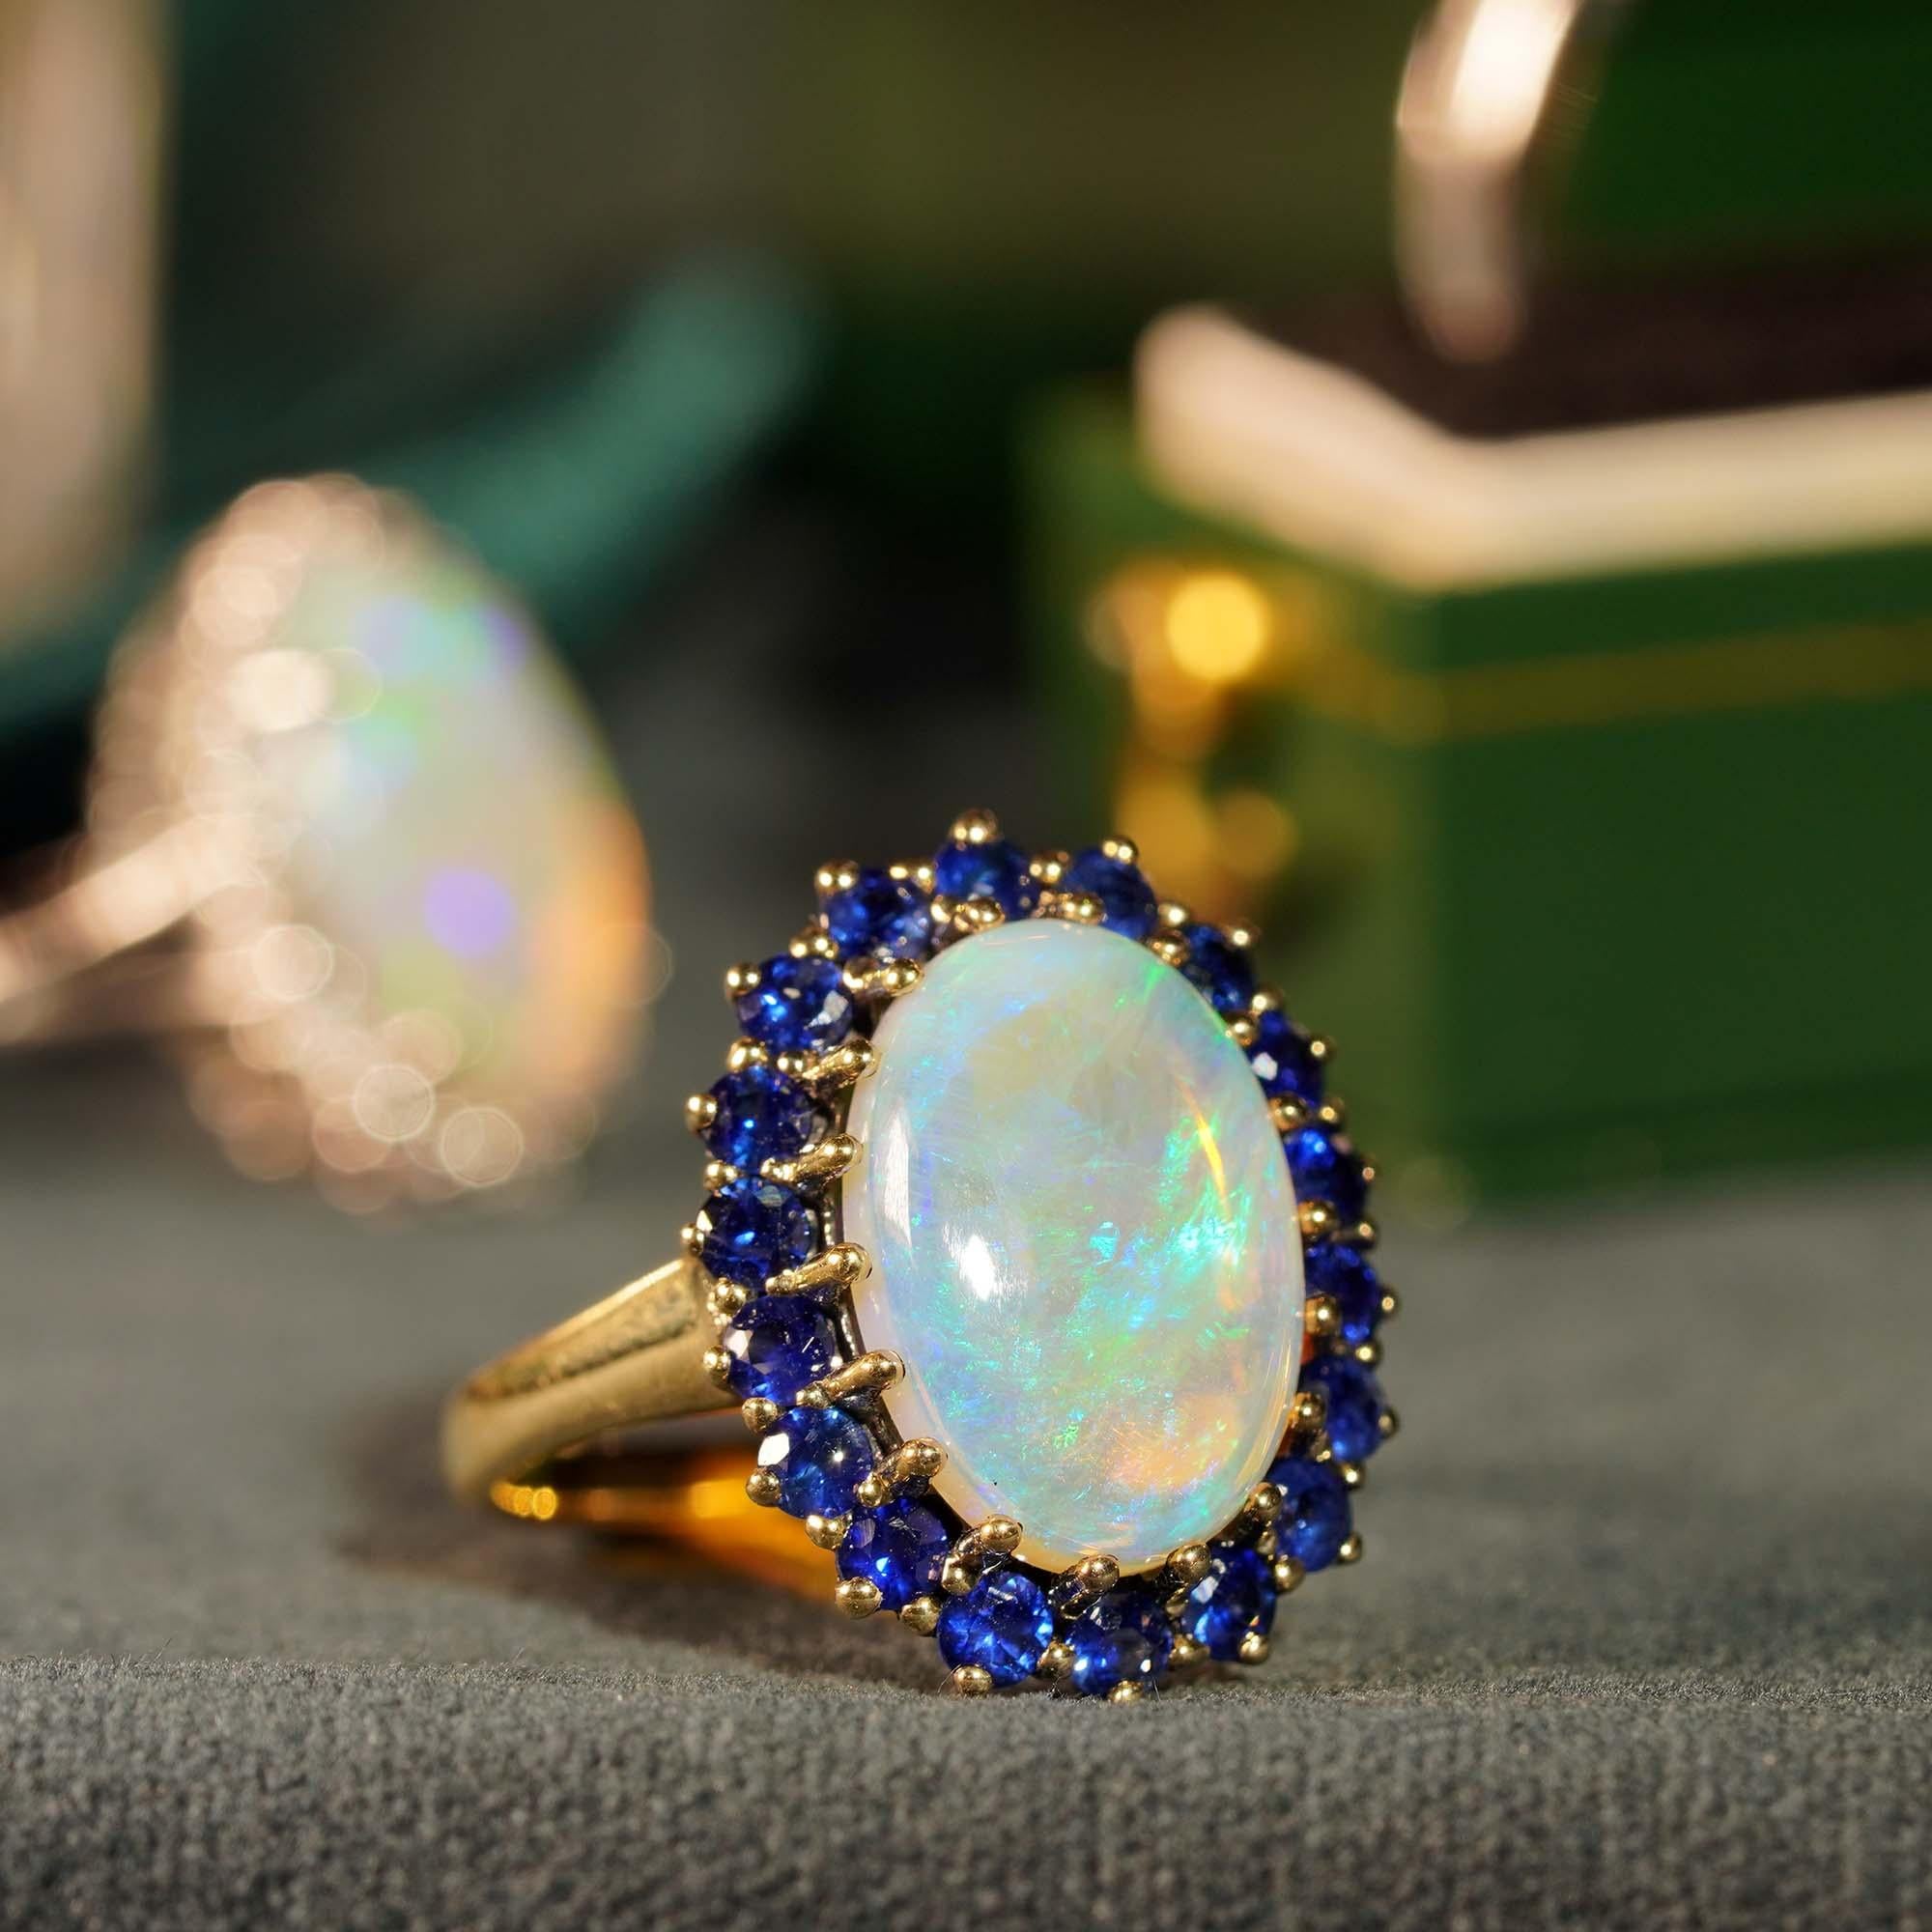 This beautiful ring is a classic vintage inspired style, the halo ring features play-of-color oval 3.43 carat opal for its center, surrounded by eight-teen blue sapphires. This would make a wonderful statement ring.

Ring Information
Style: